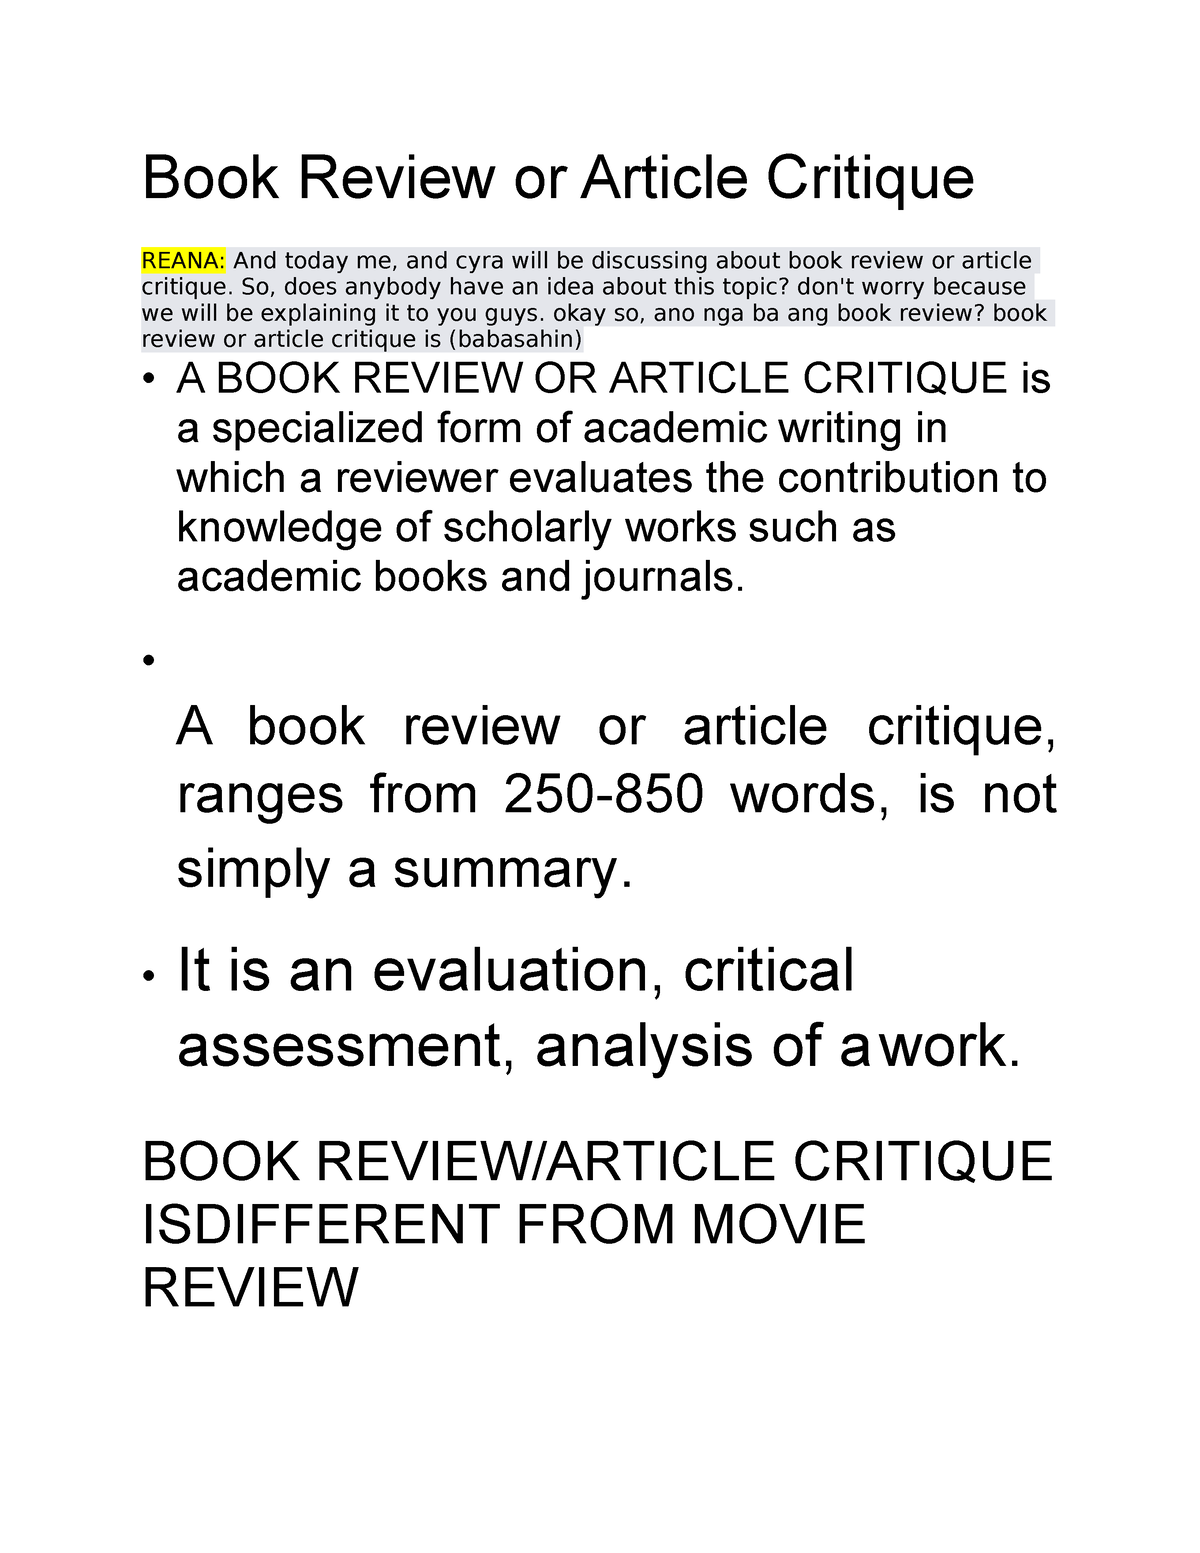 what is book review and article critique